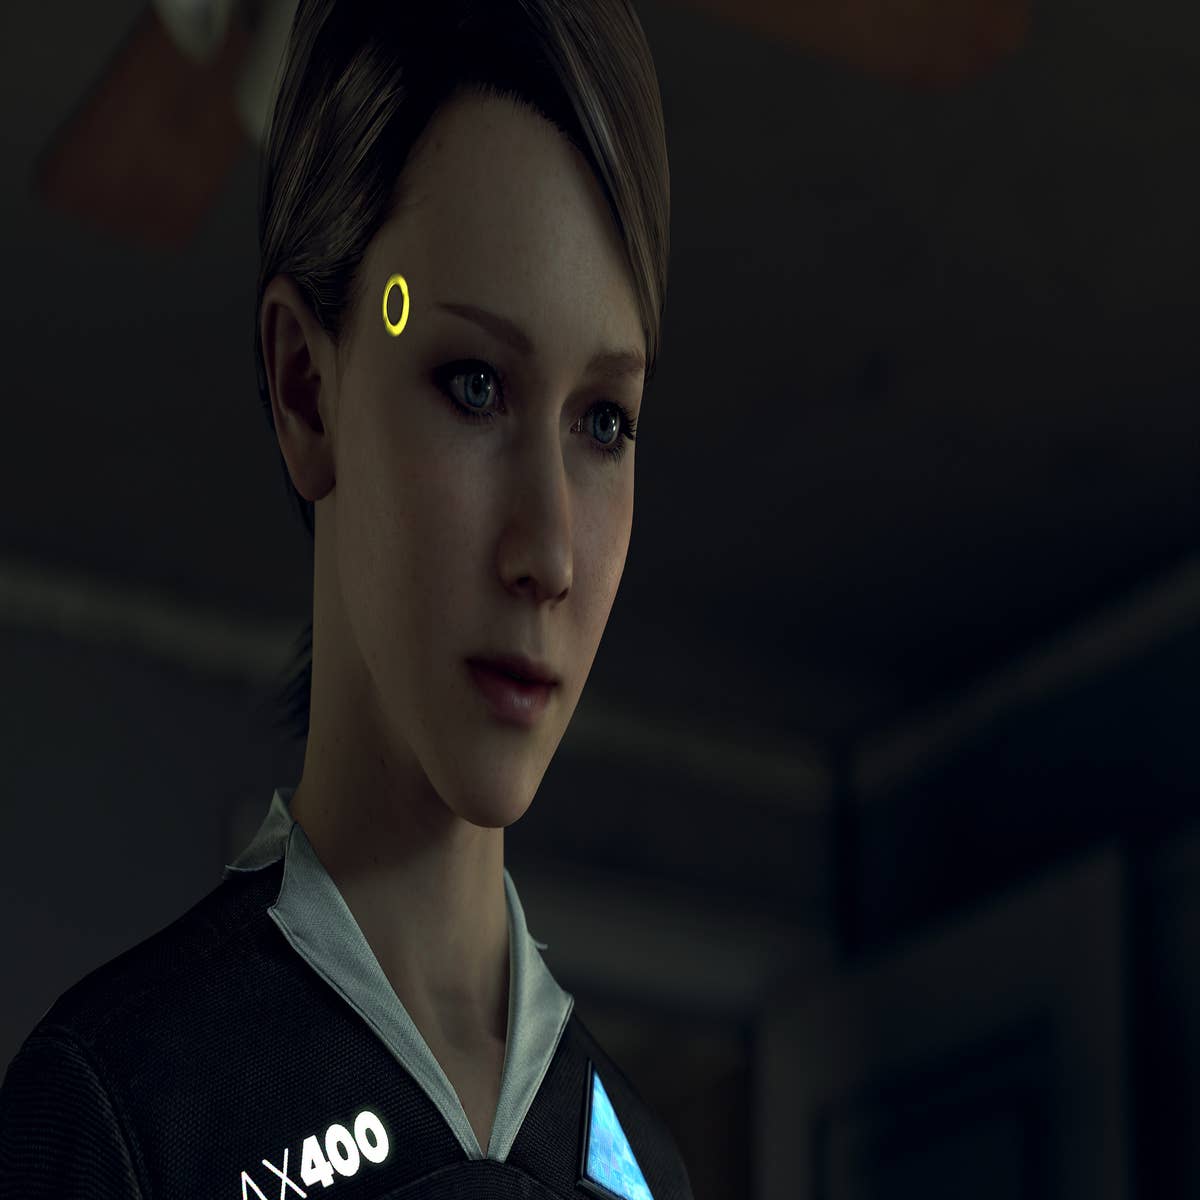 Detroit: Become Human: What You Need to Know